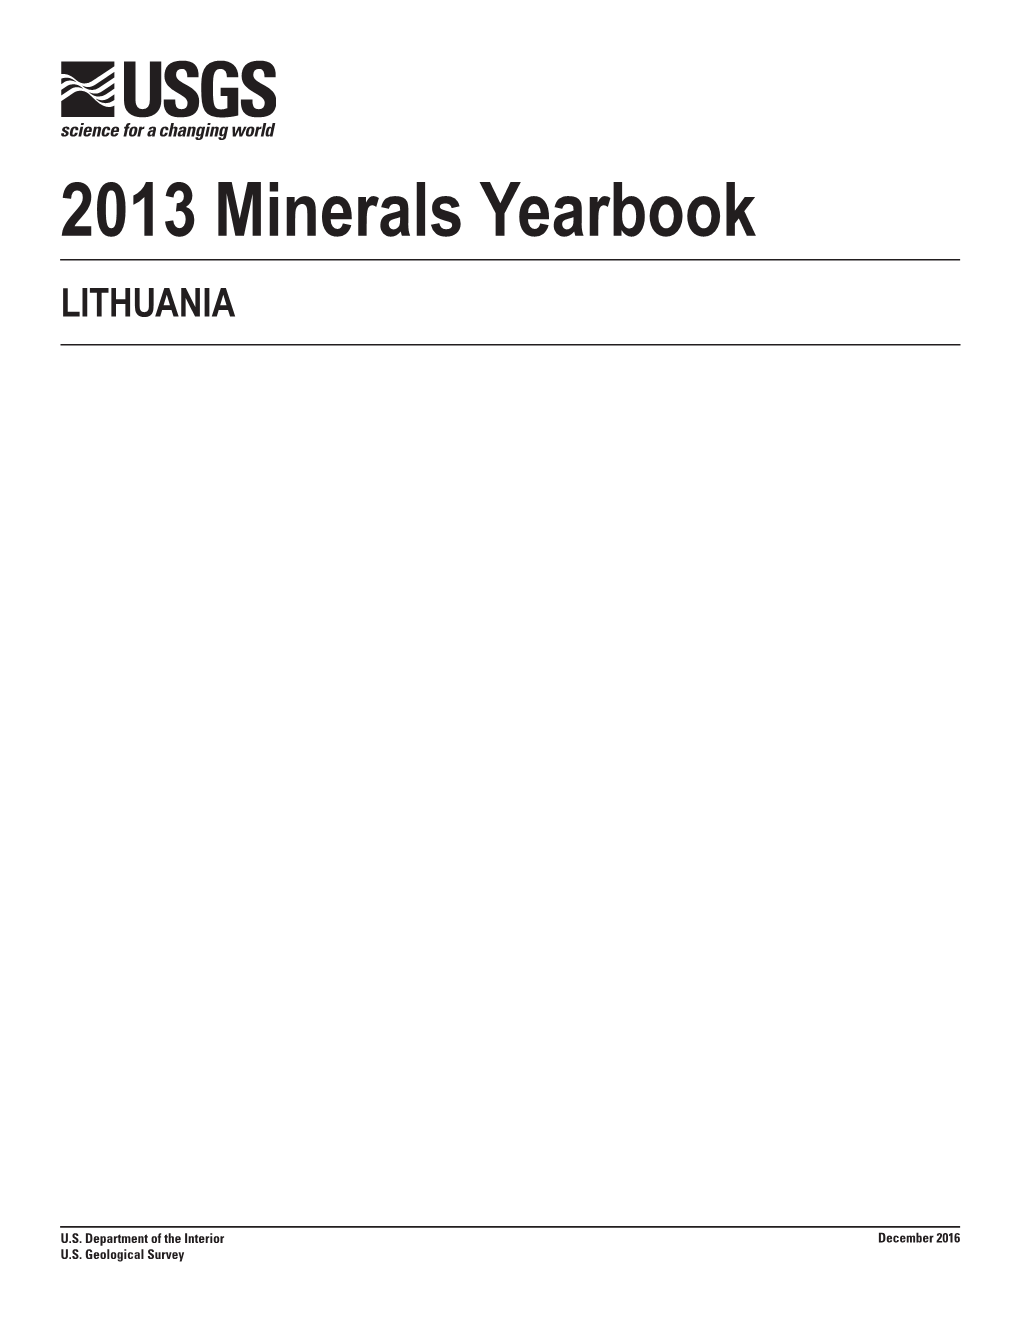 The Mineral Industry of Lithuania in 2013